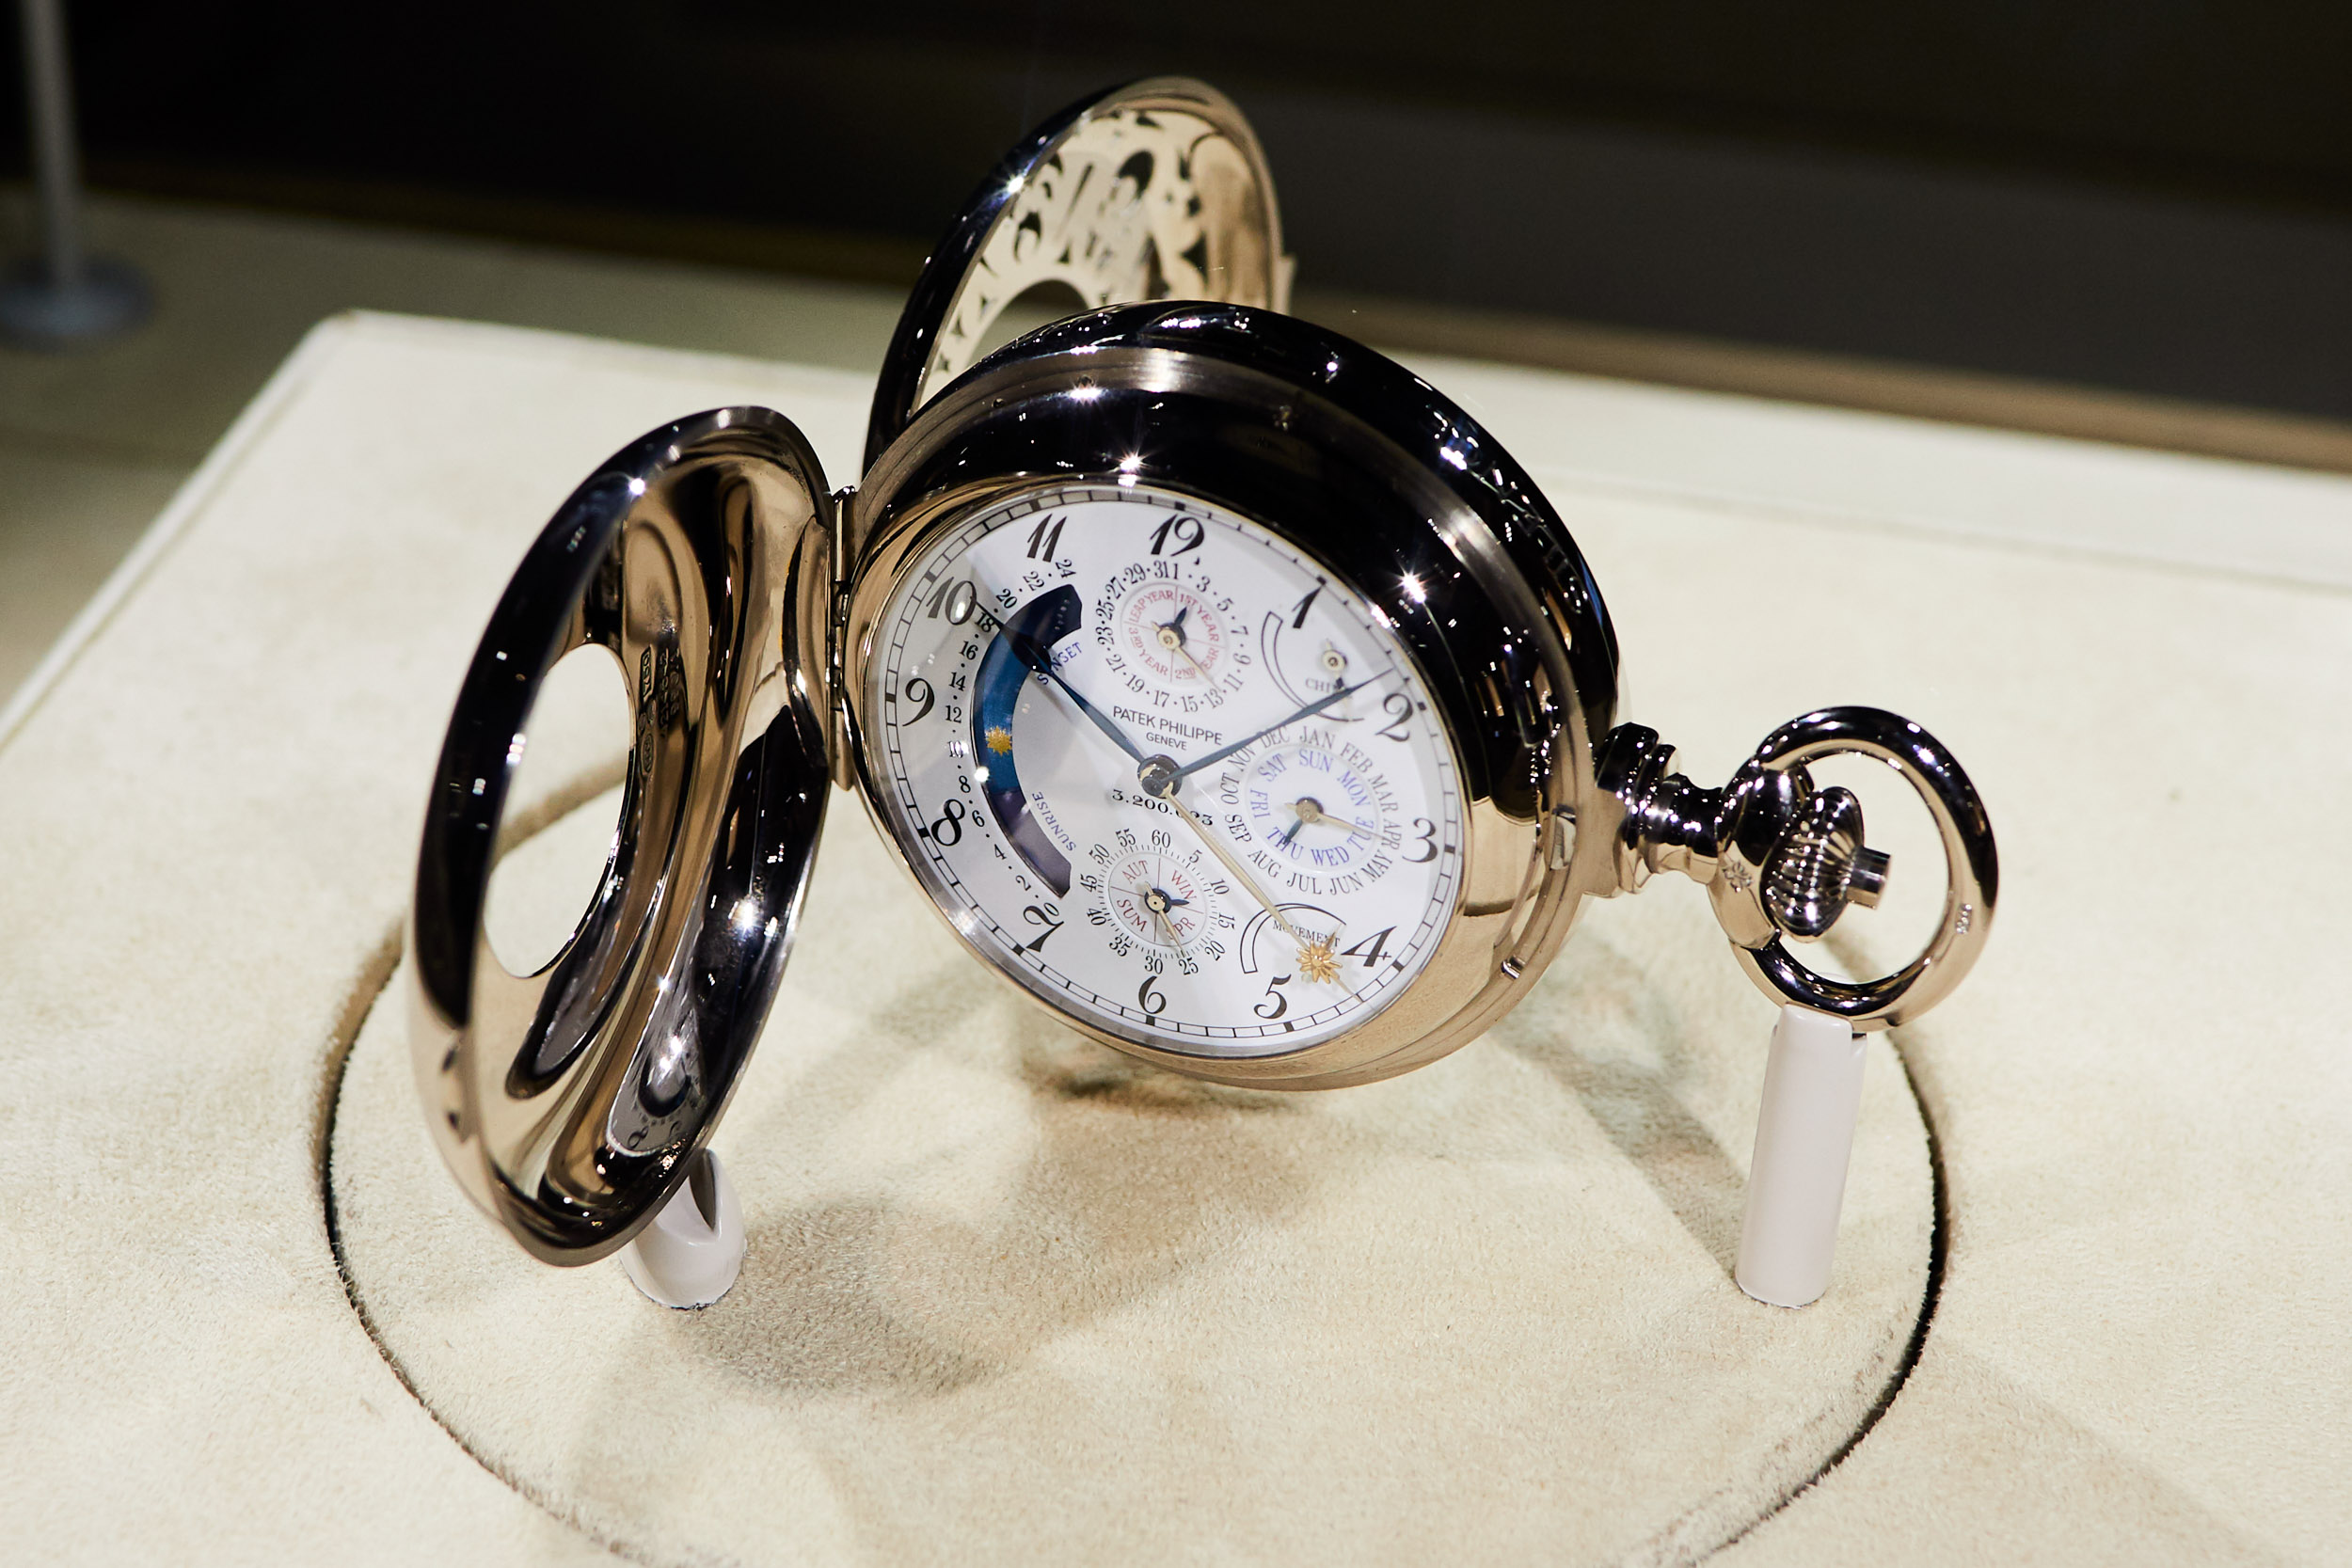 Patek Philippe Rare Handcrafts - The Hour Glass Official